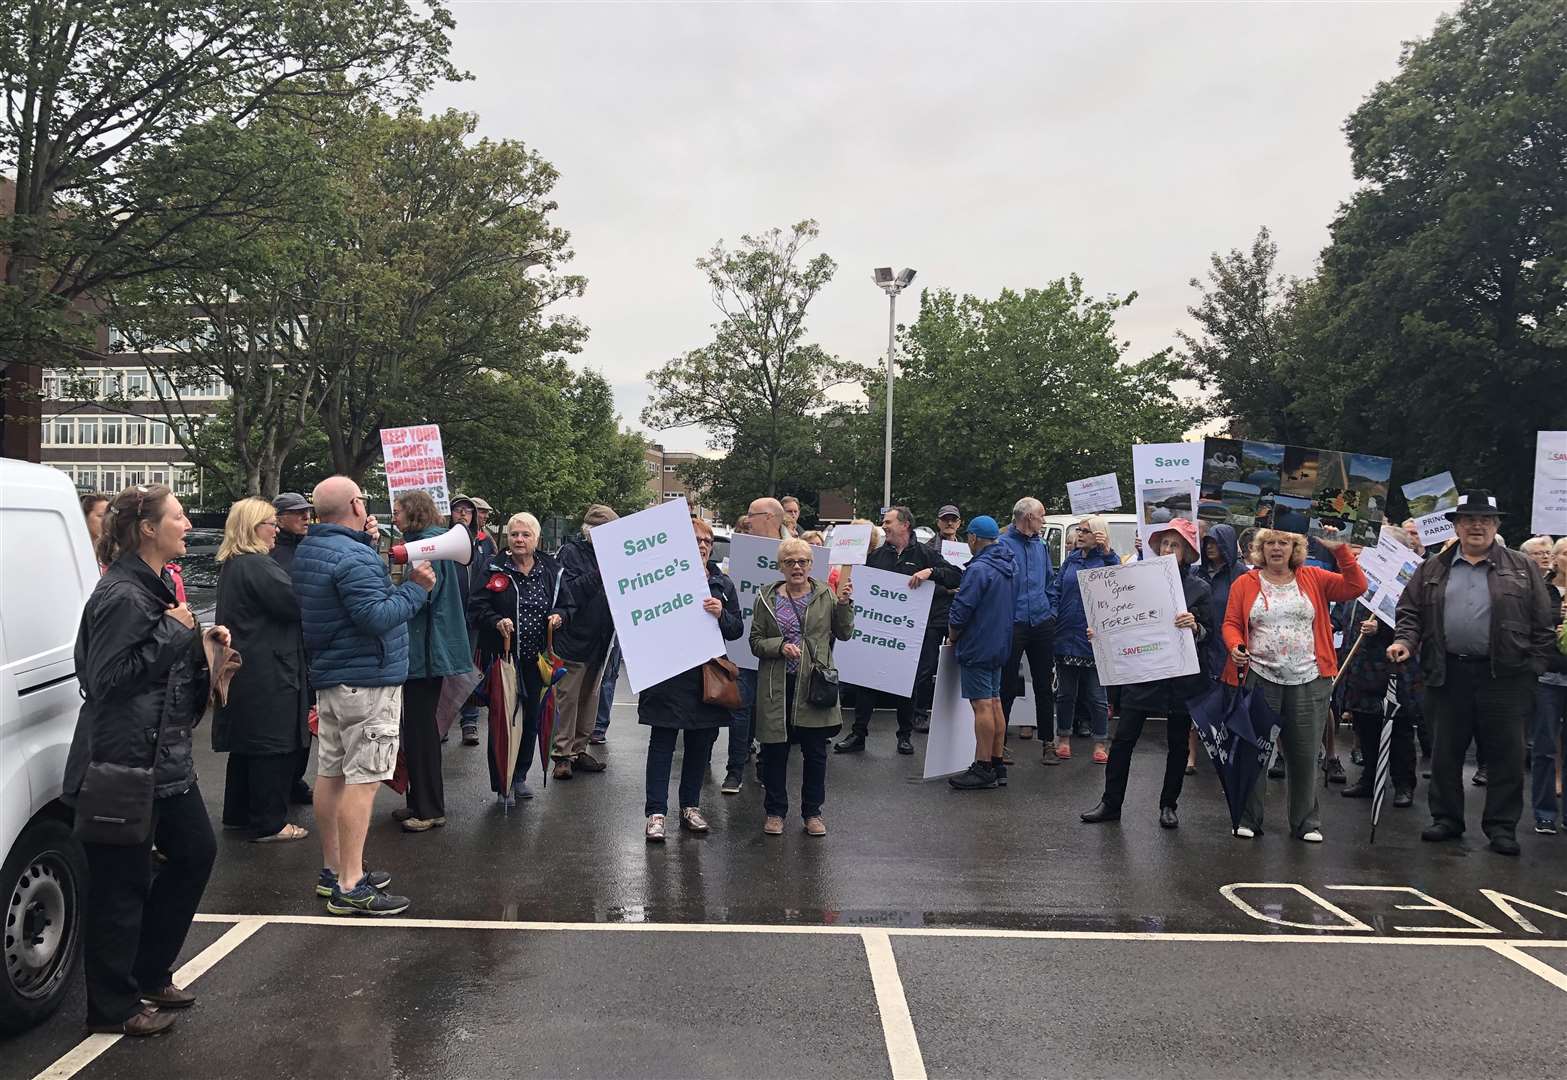 Protesters against the Princes Parade scheme gathered outside Folkestone and Hythe District Council